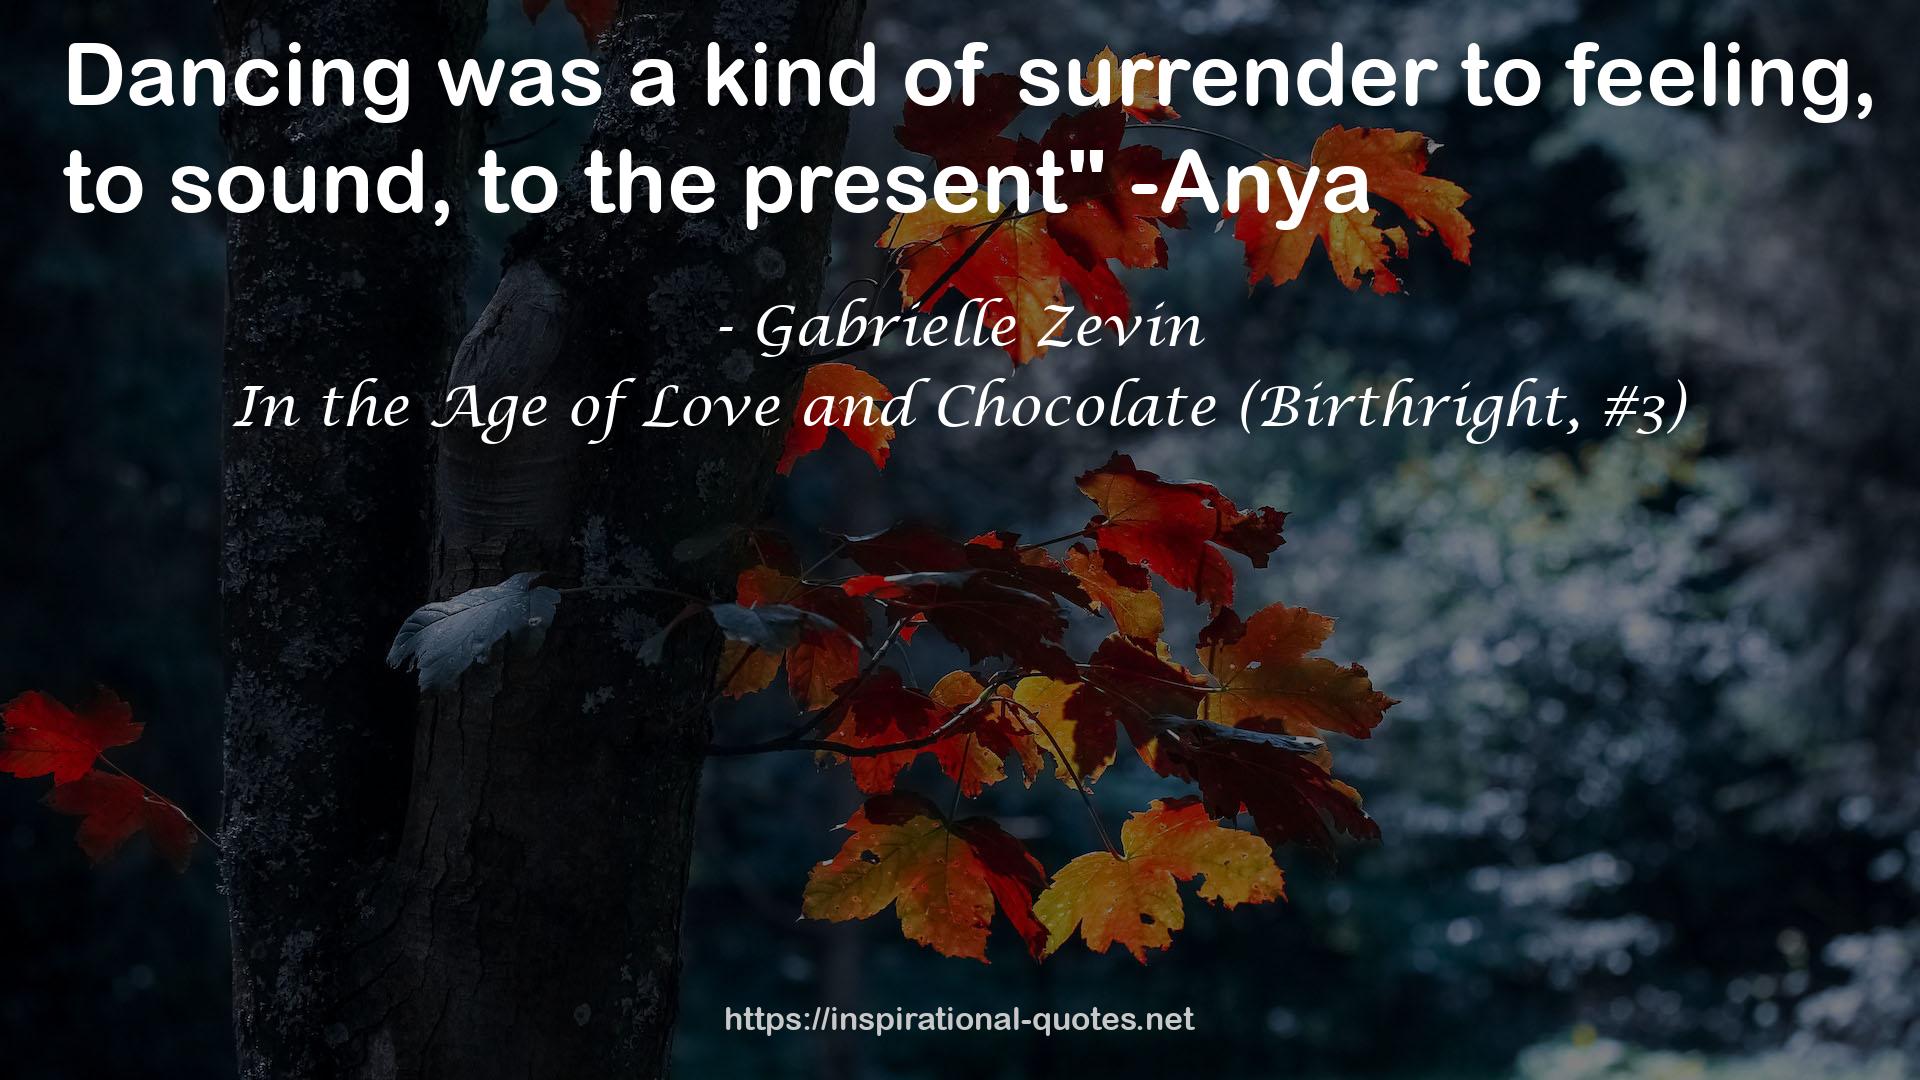 In the Age of Love and Chocolate (Birthright, #3) QUOTES